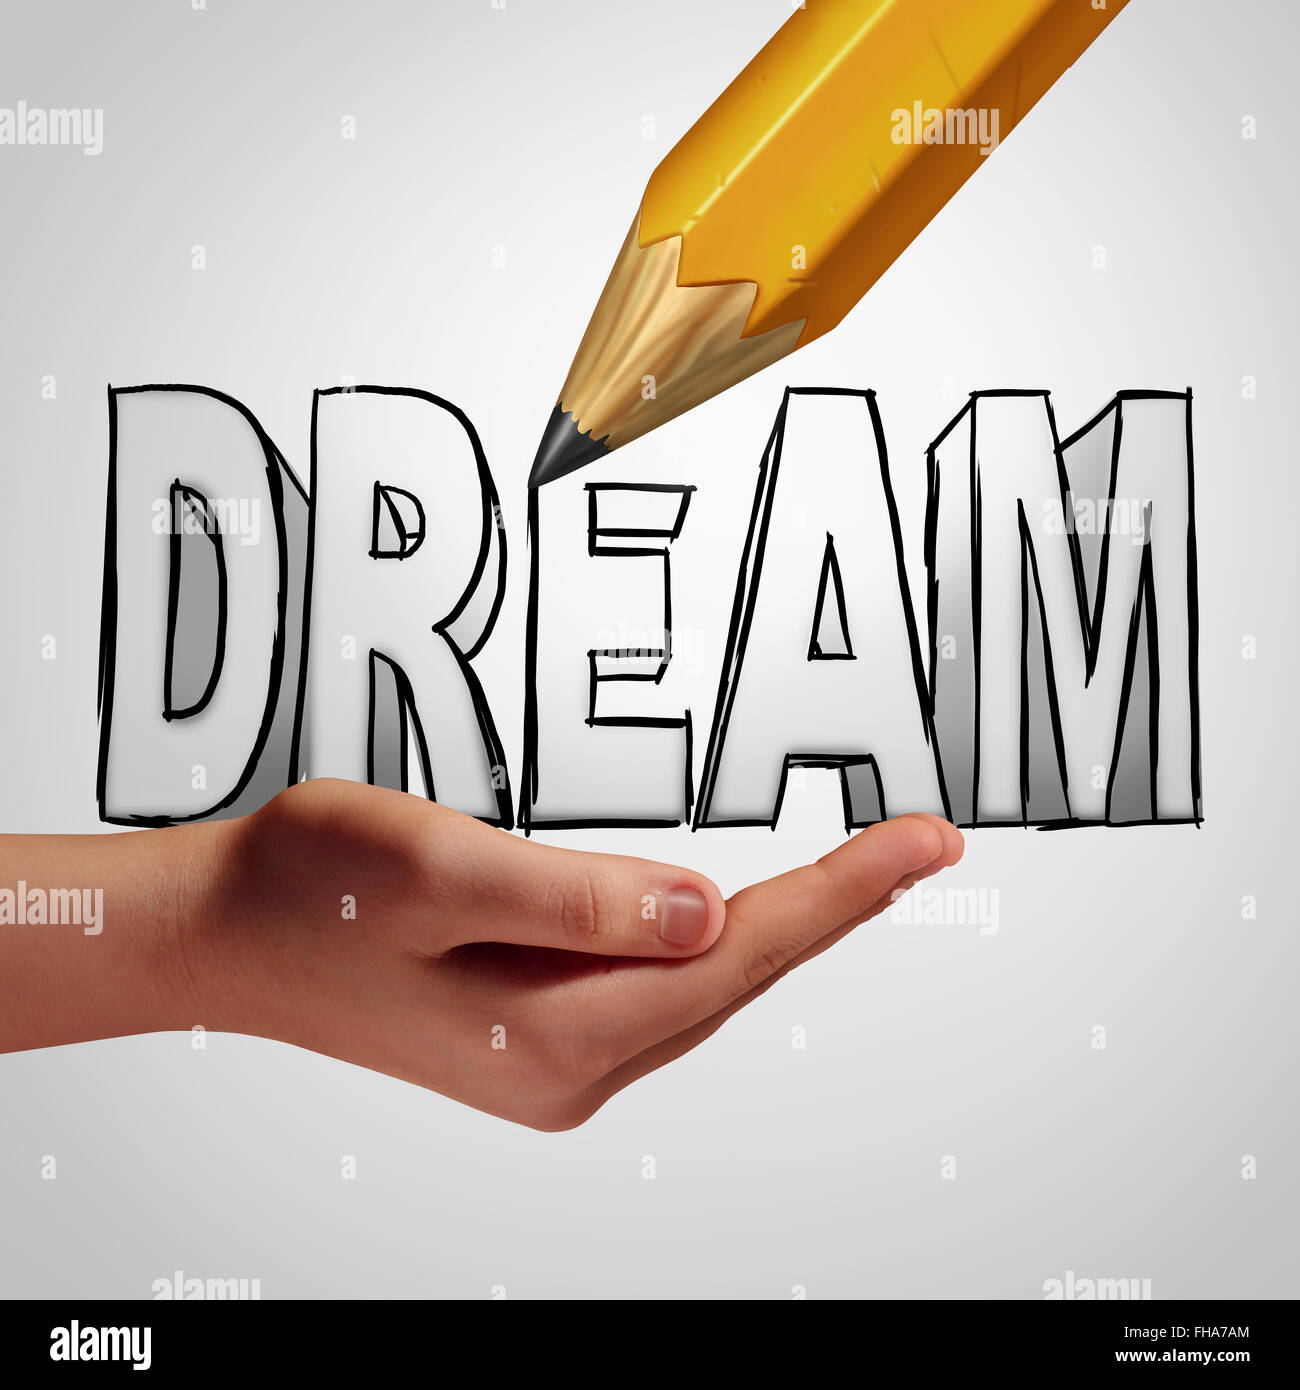 Dream planning idea concept to make it happen by taking control and creating your destiny by focusing on a positive strategy for success in the future. Stock Photo